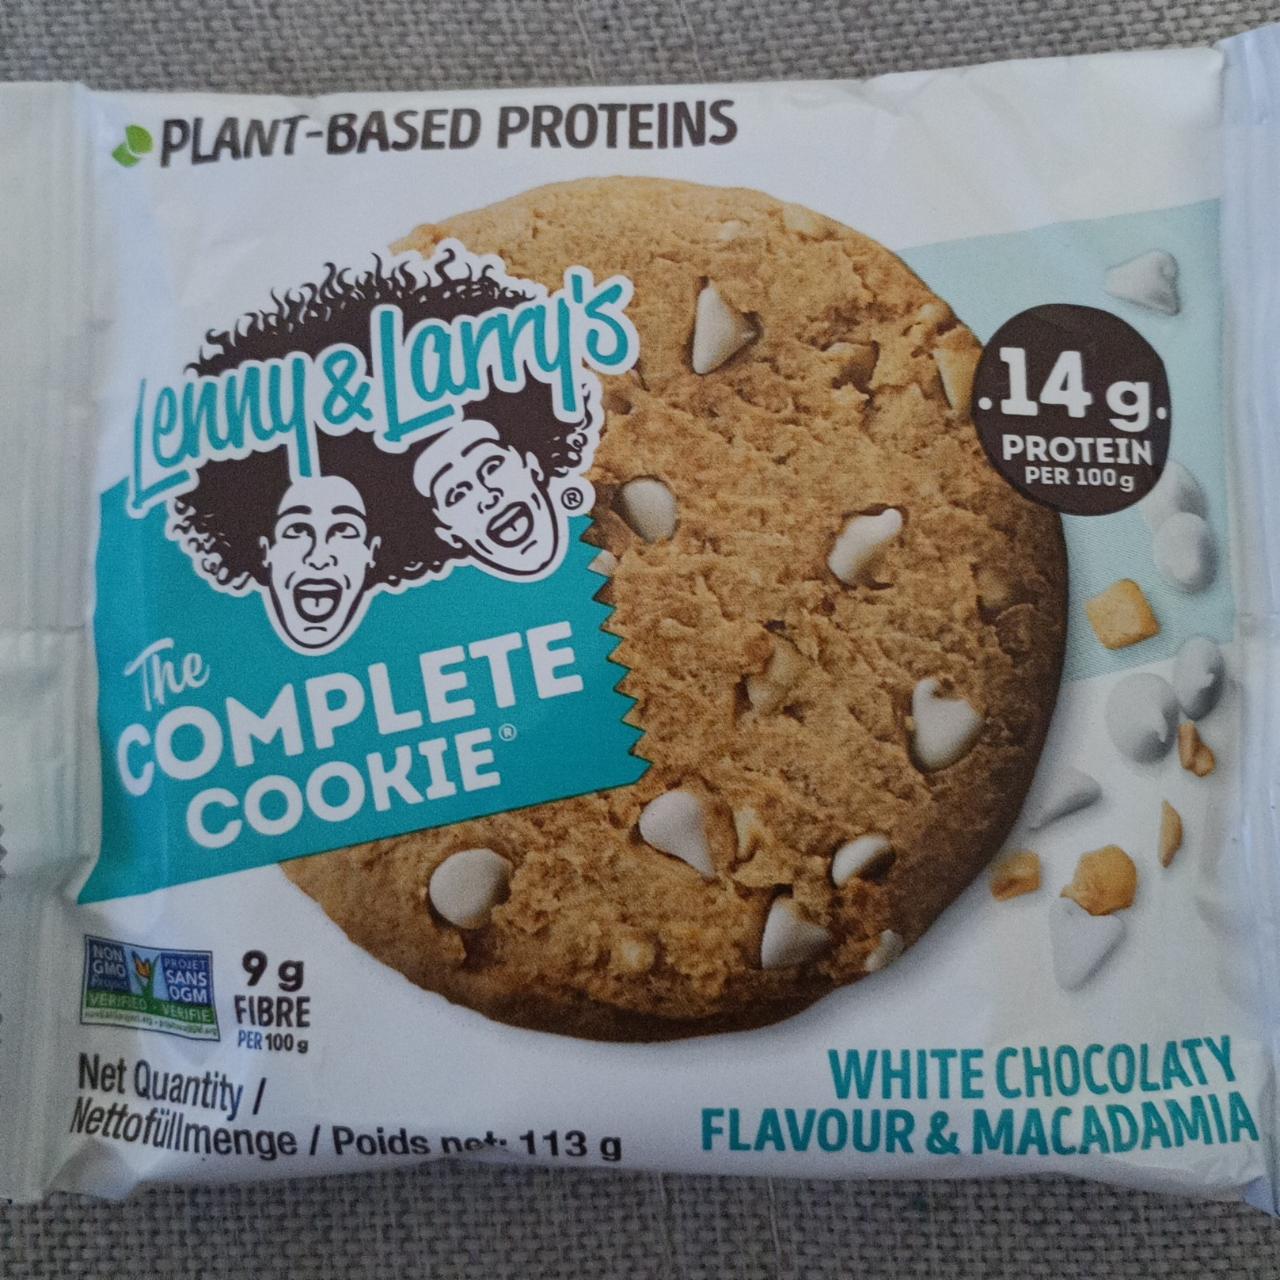 Fotografie - The Complete Cookie White Chocolate Flavour & Macadamia 14g protein Lenny & Larry's